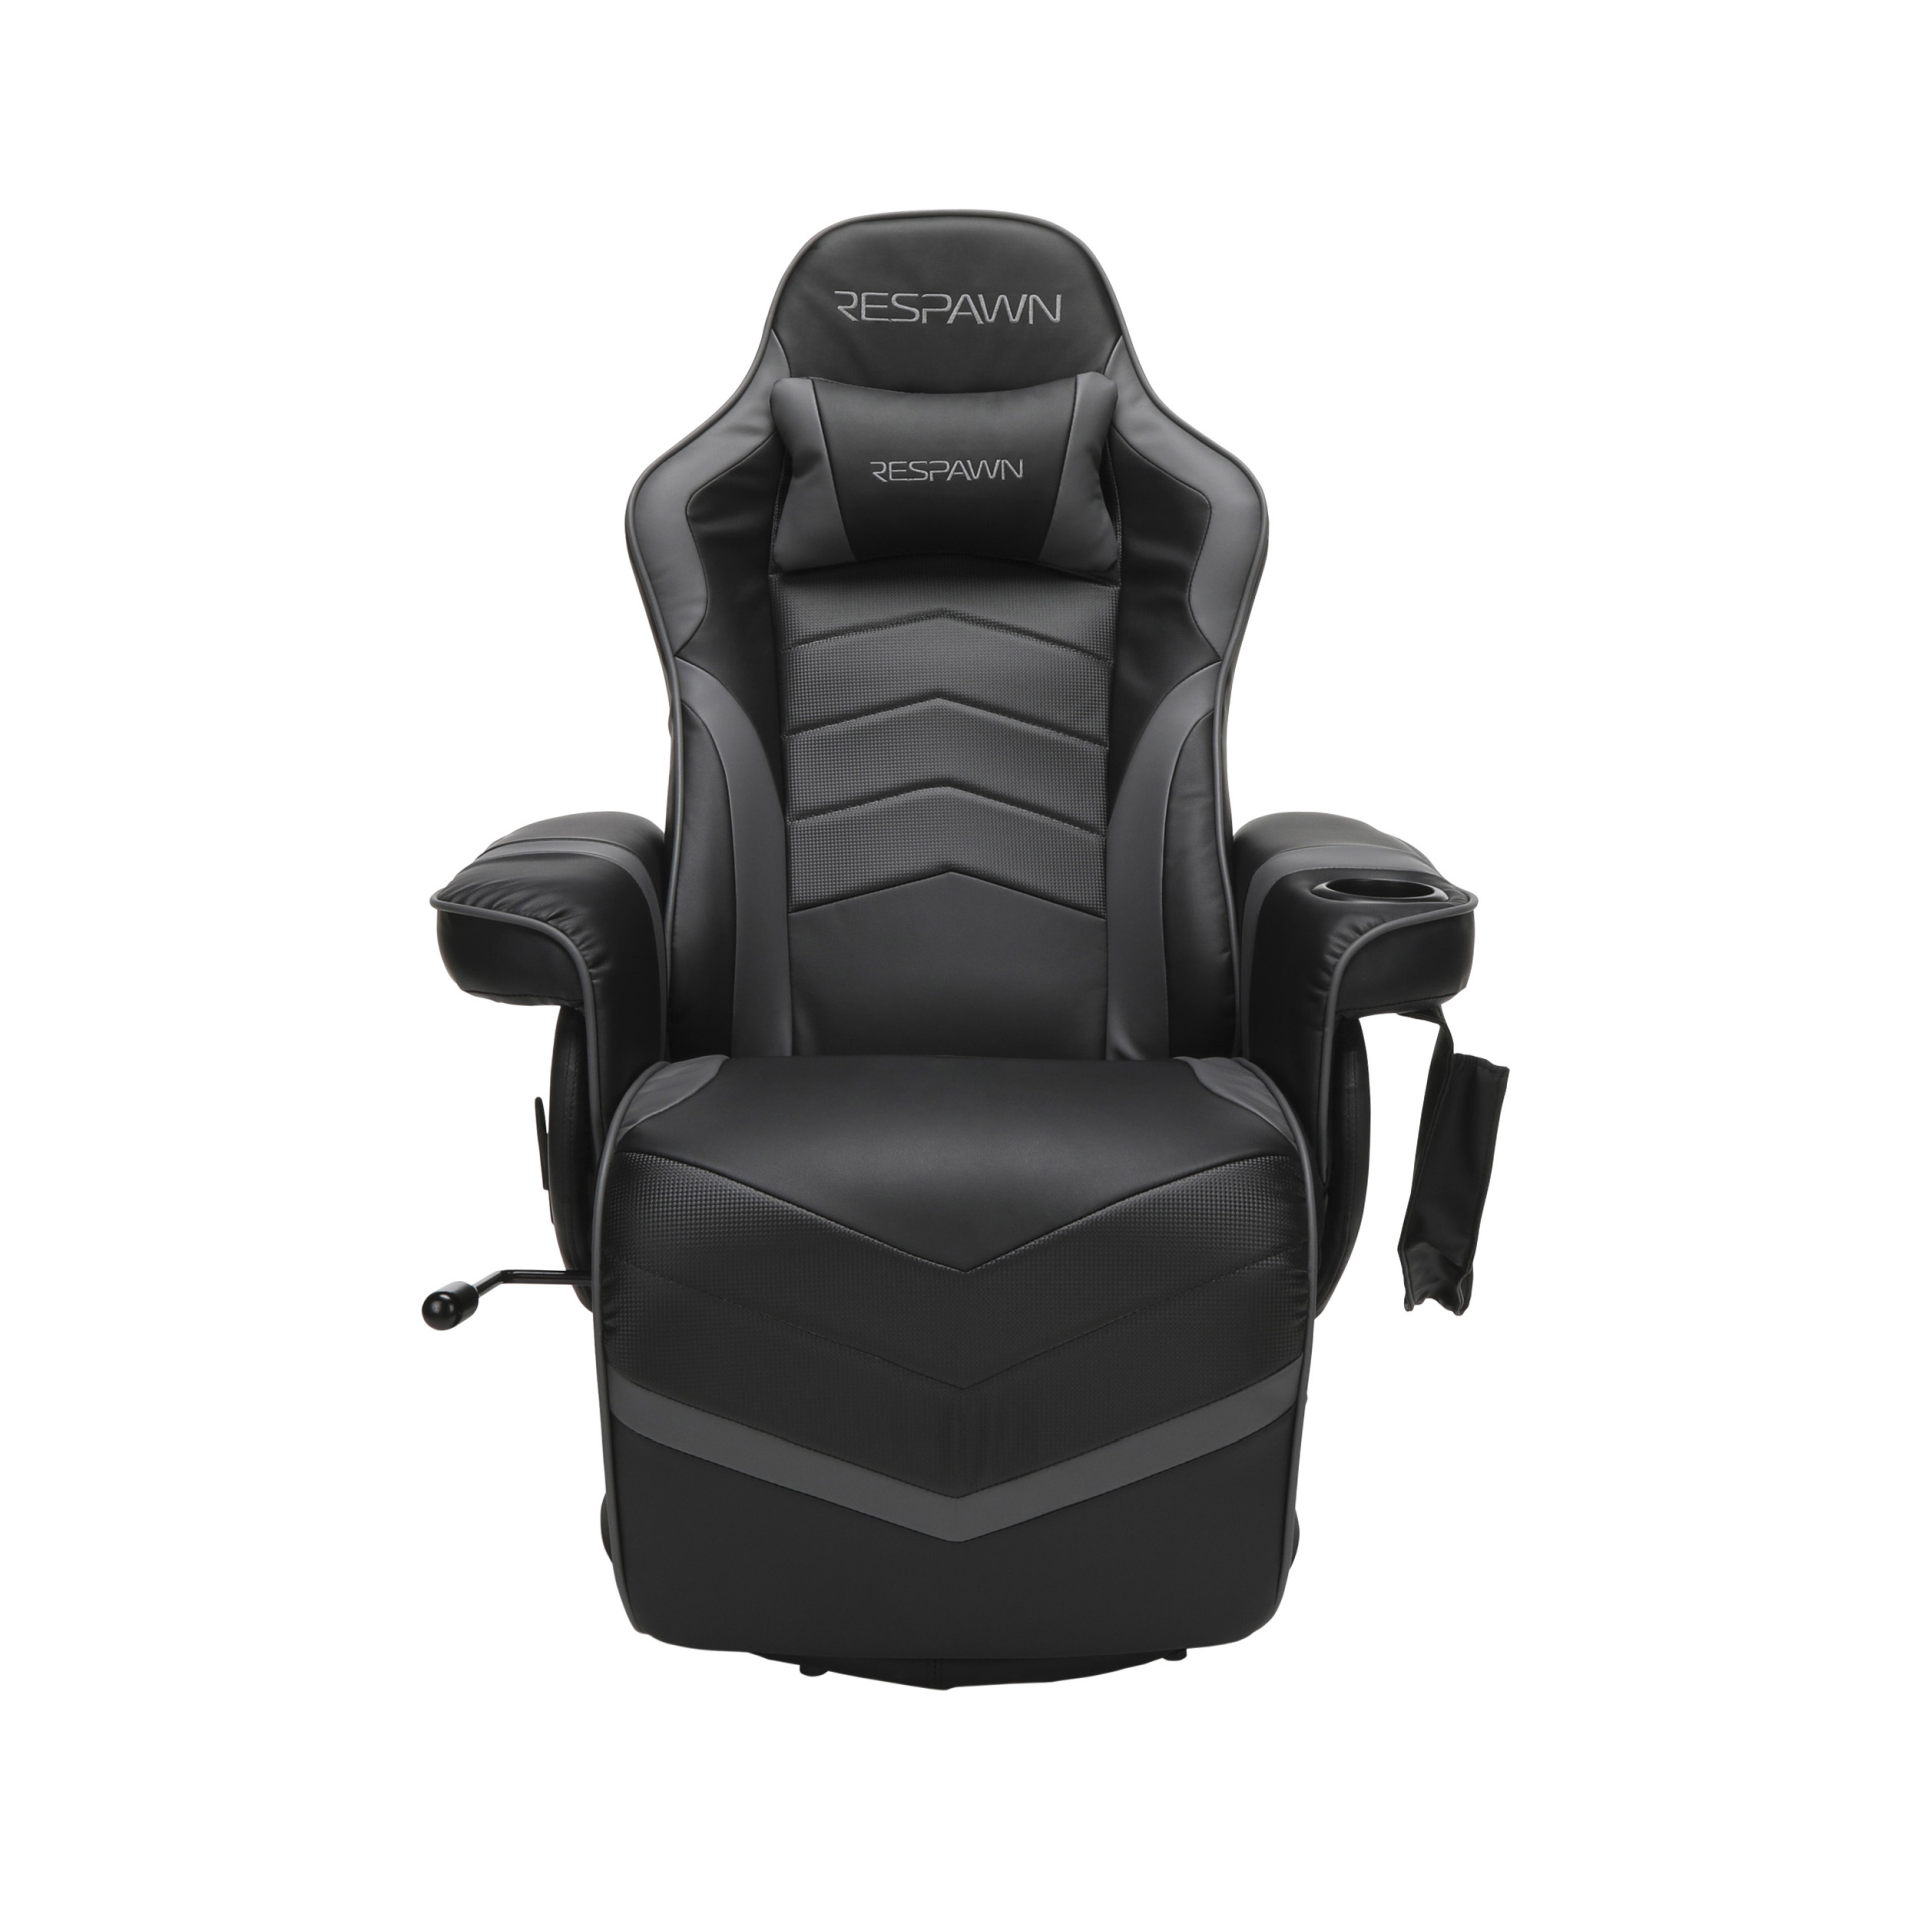 RESPAWN RSP-900 Gaming Recliner #18